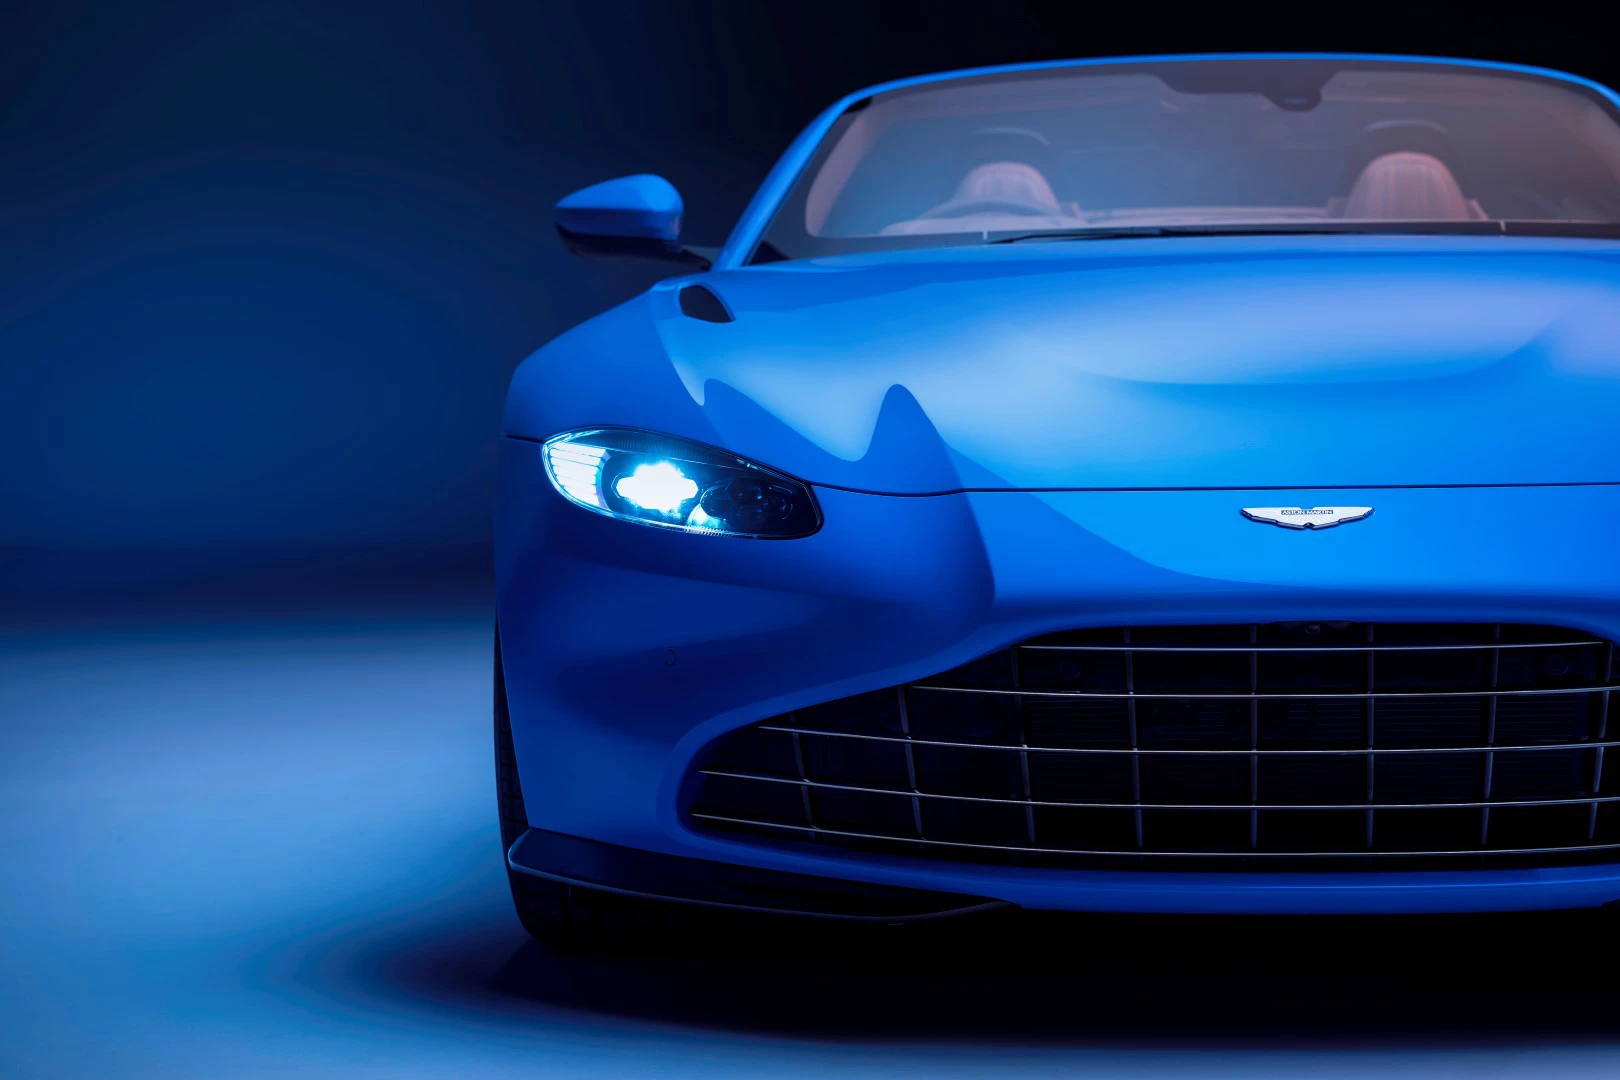 Aston Martin enters a new era with brand repositioning and new iconic wing logo